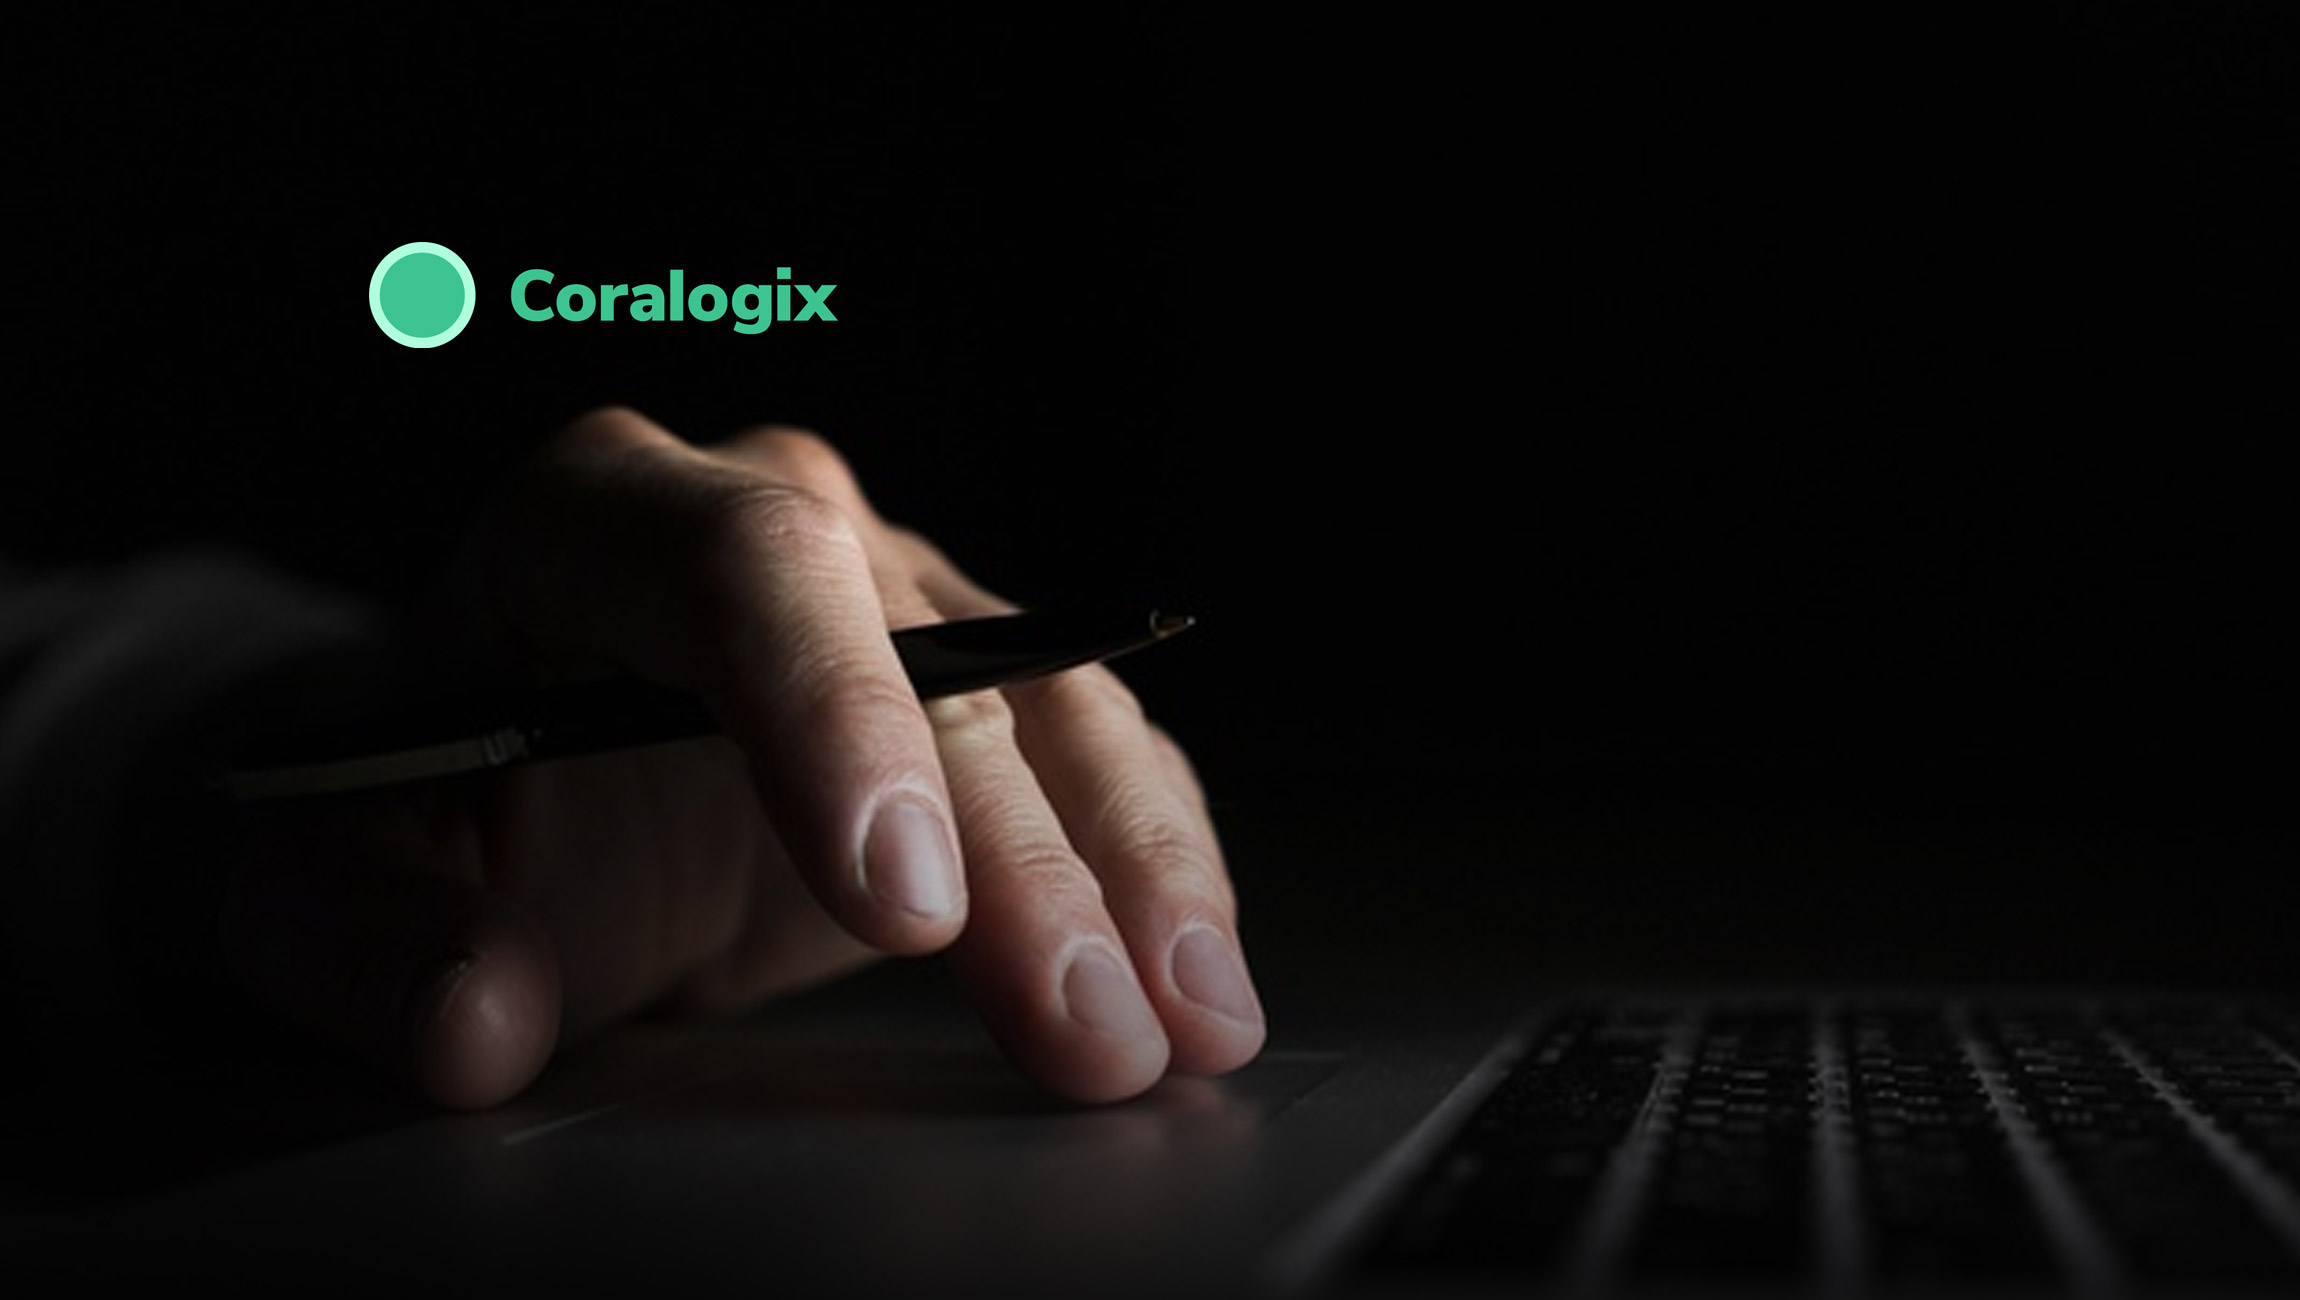 Coralogix Partners with Webinfinity to Build Solid Foundation for Robust Partner Engagement Program